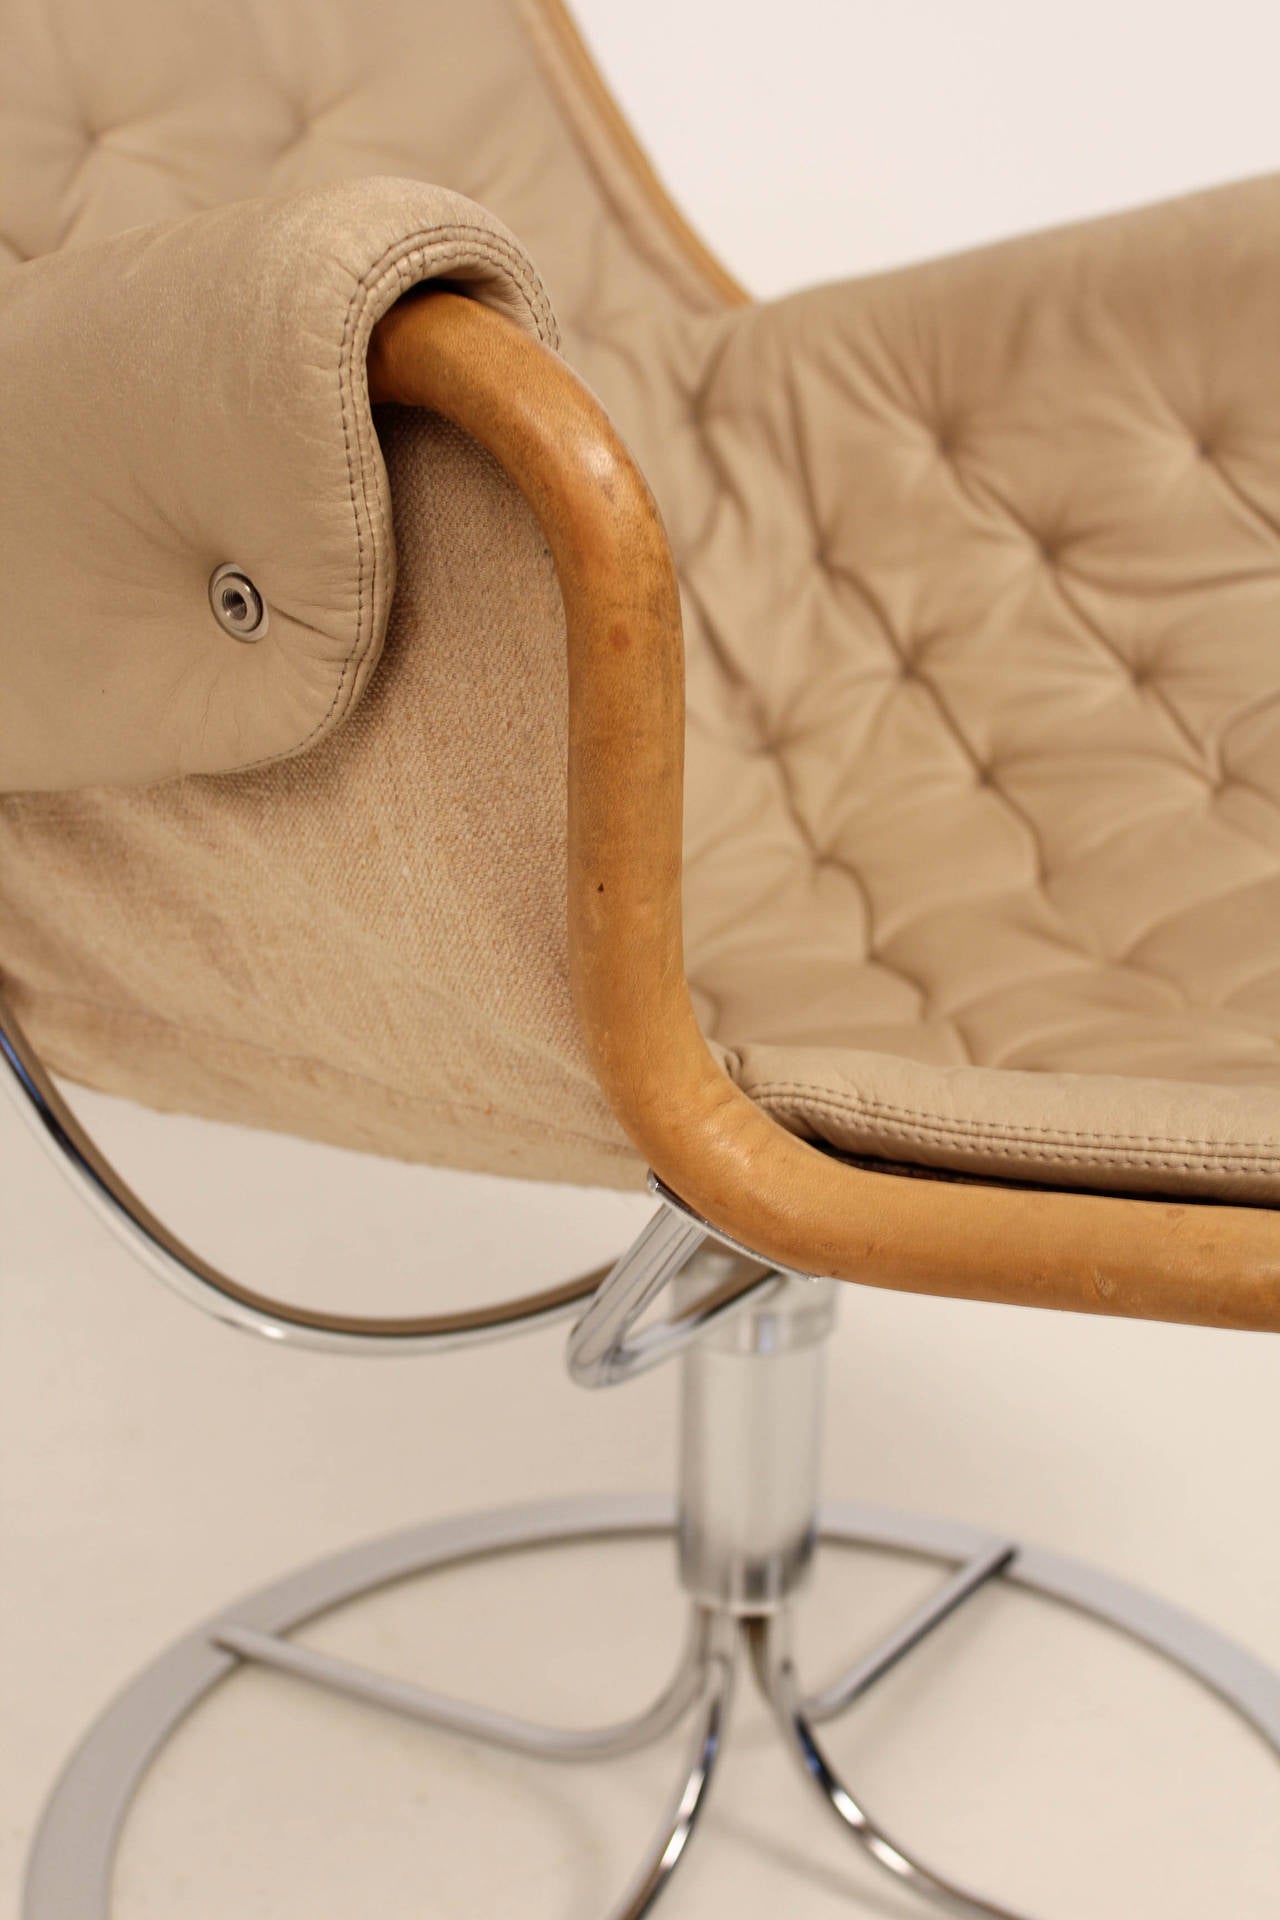 Original Jetson lounge swivel chair by Bruno Mathsson for Dux.
With chrome base,canvas backing and original leather upholstery and head rest pillow.Also available an extra original green olive fabric upholstery and head rest pillow.